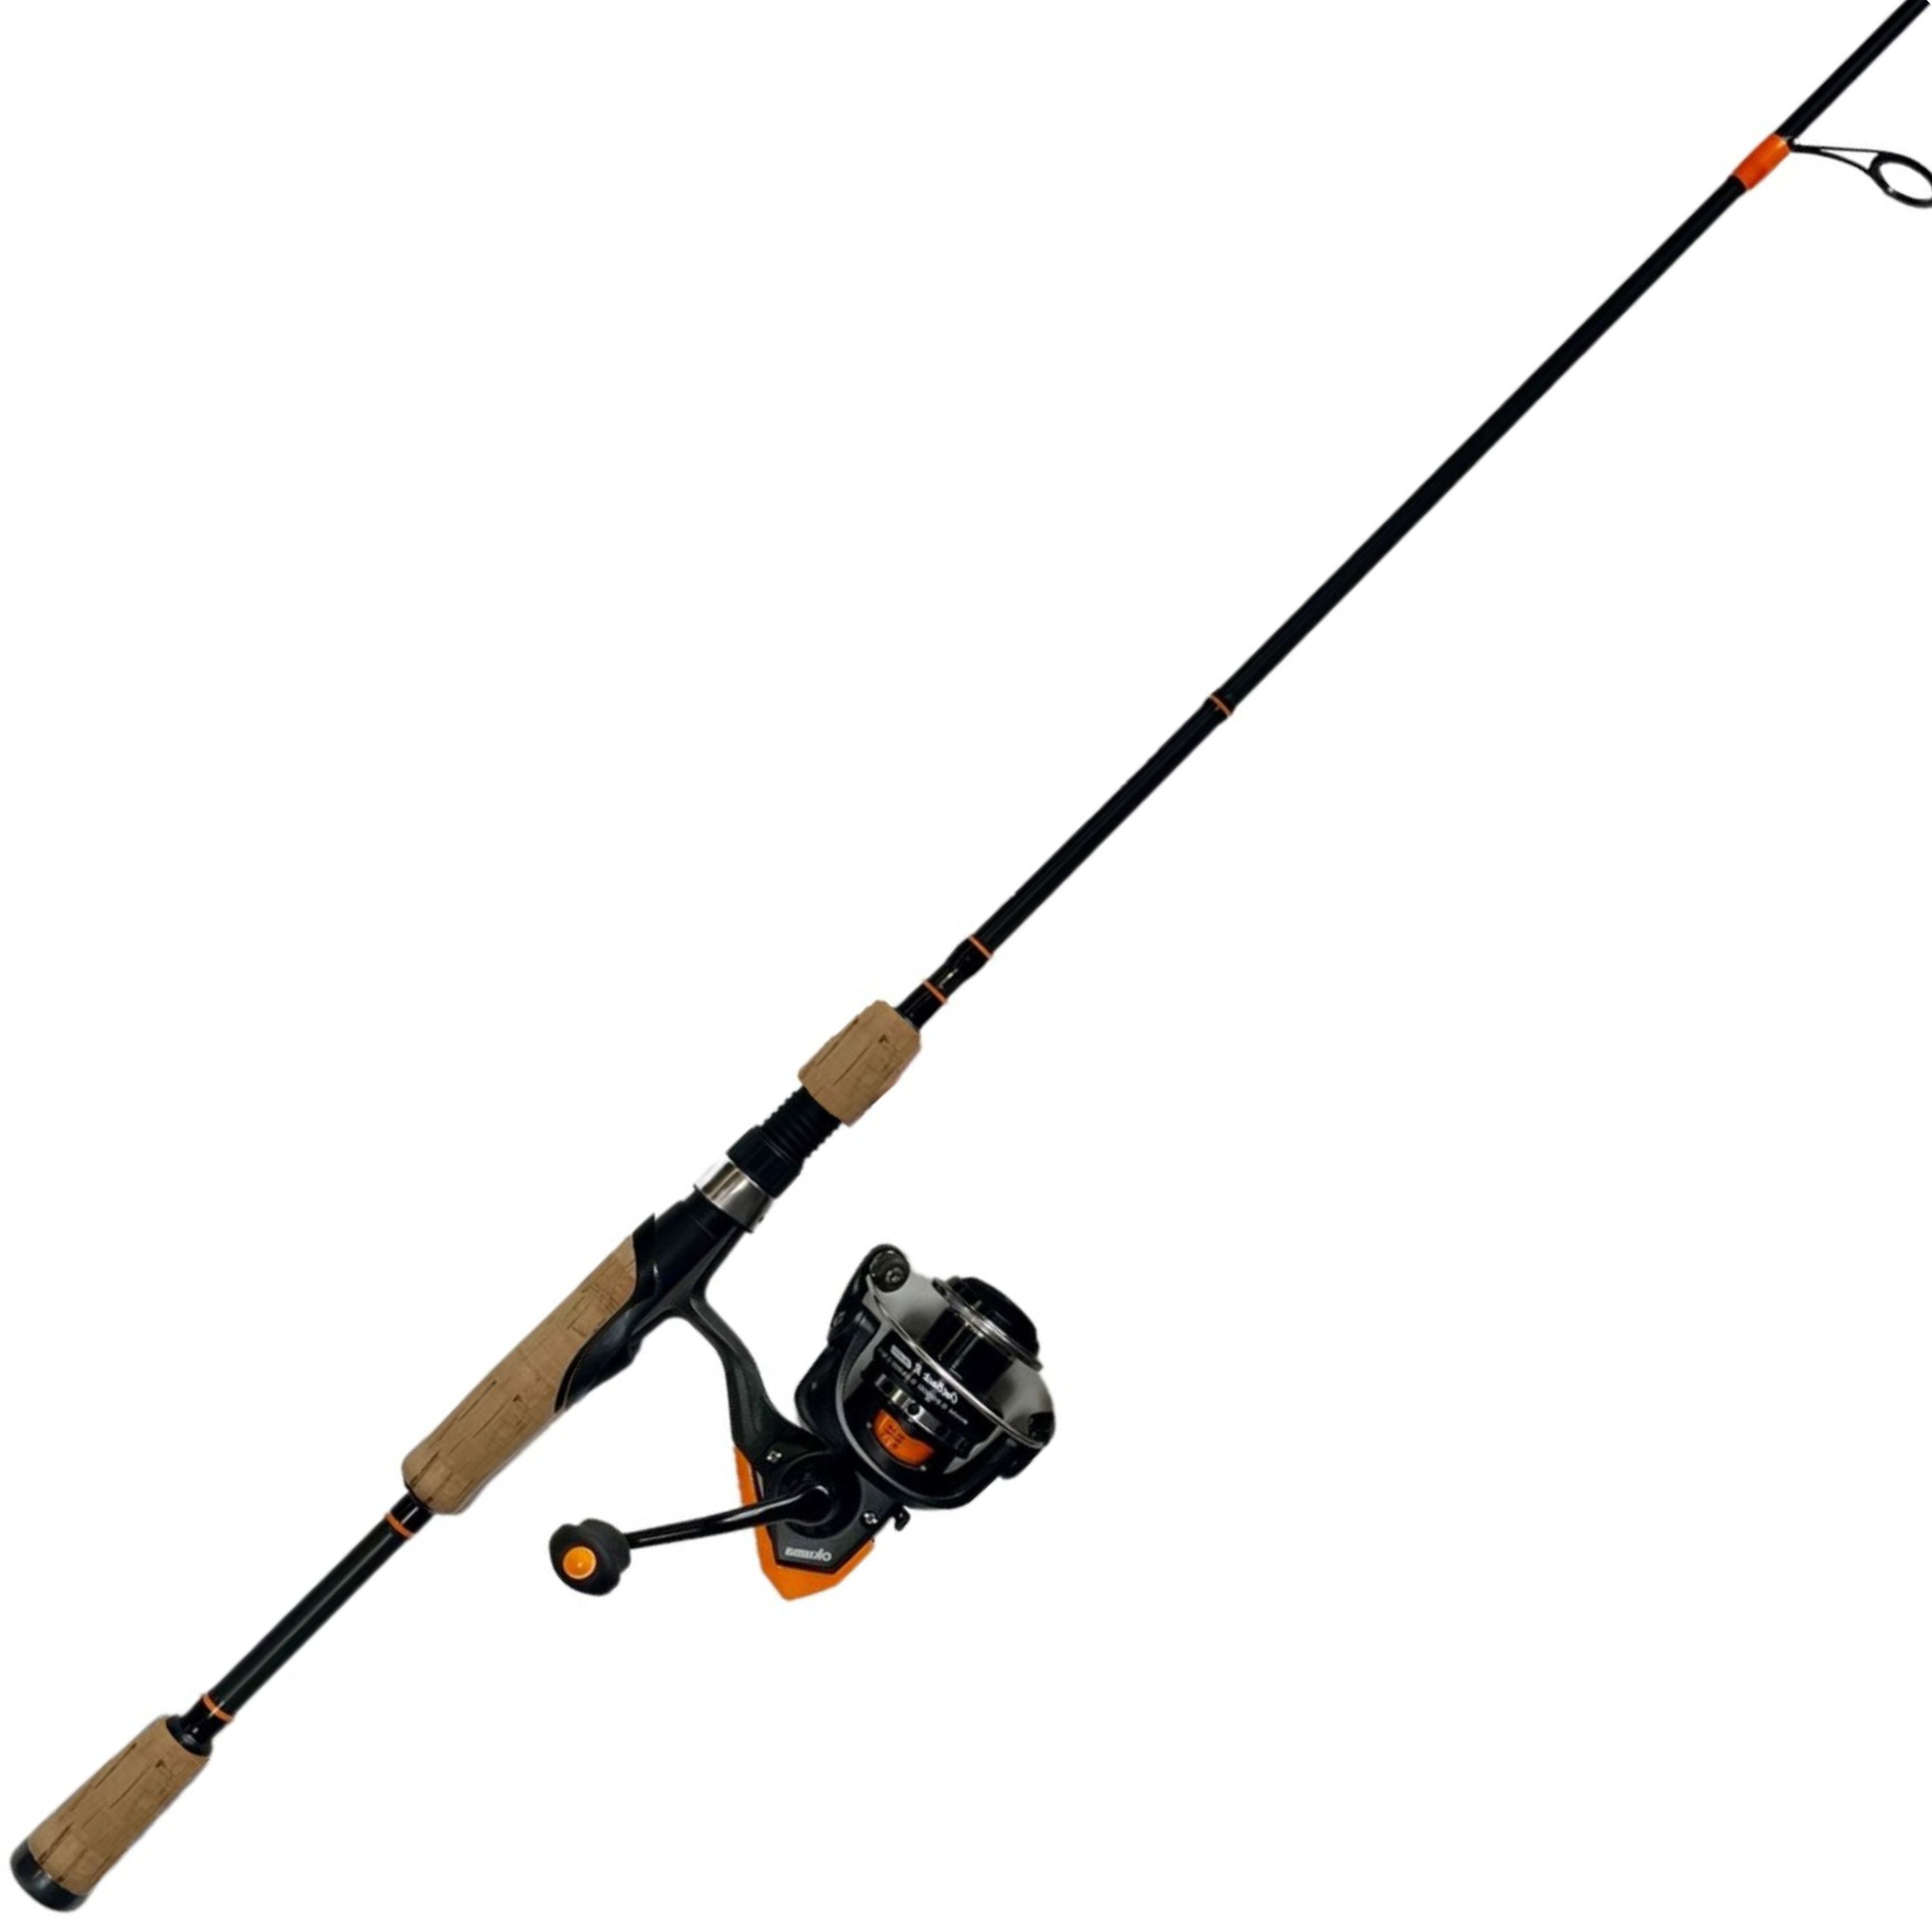 "Outback R" Spinning combo